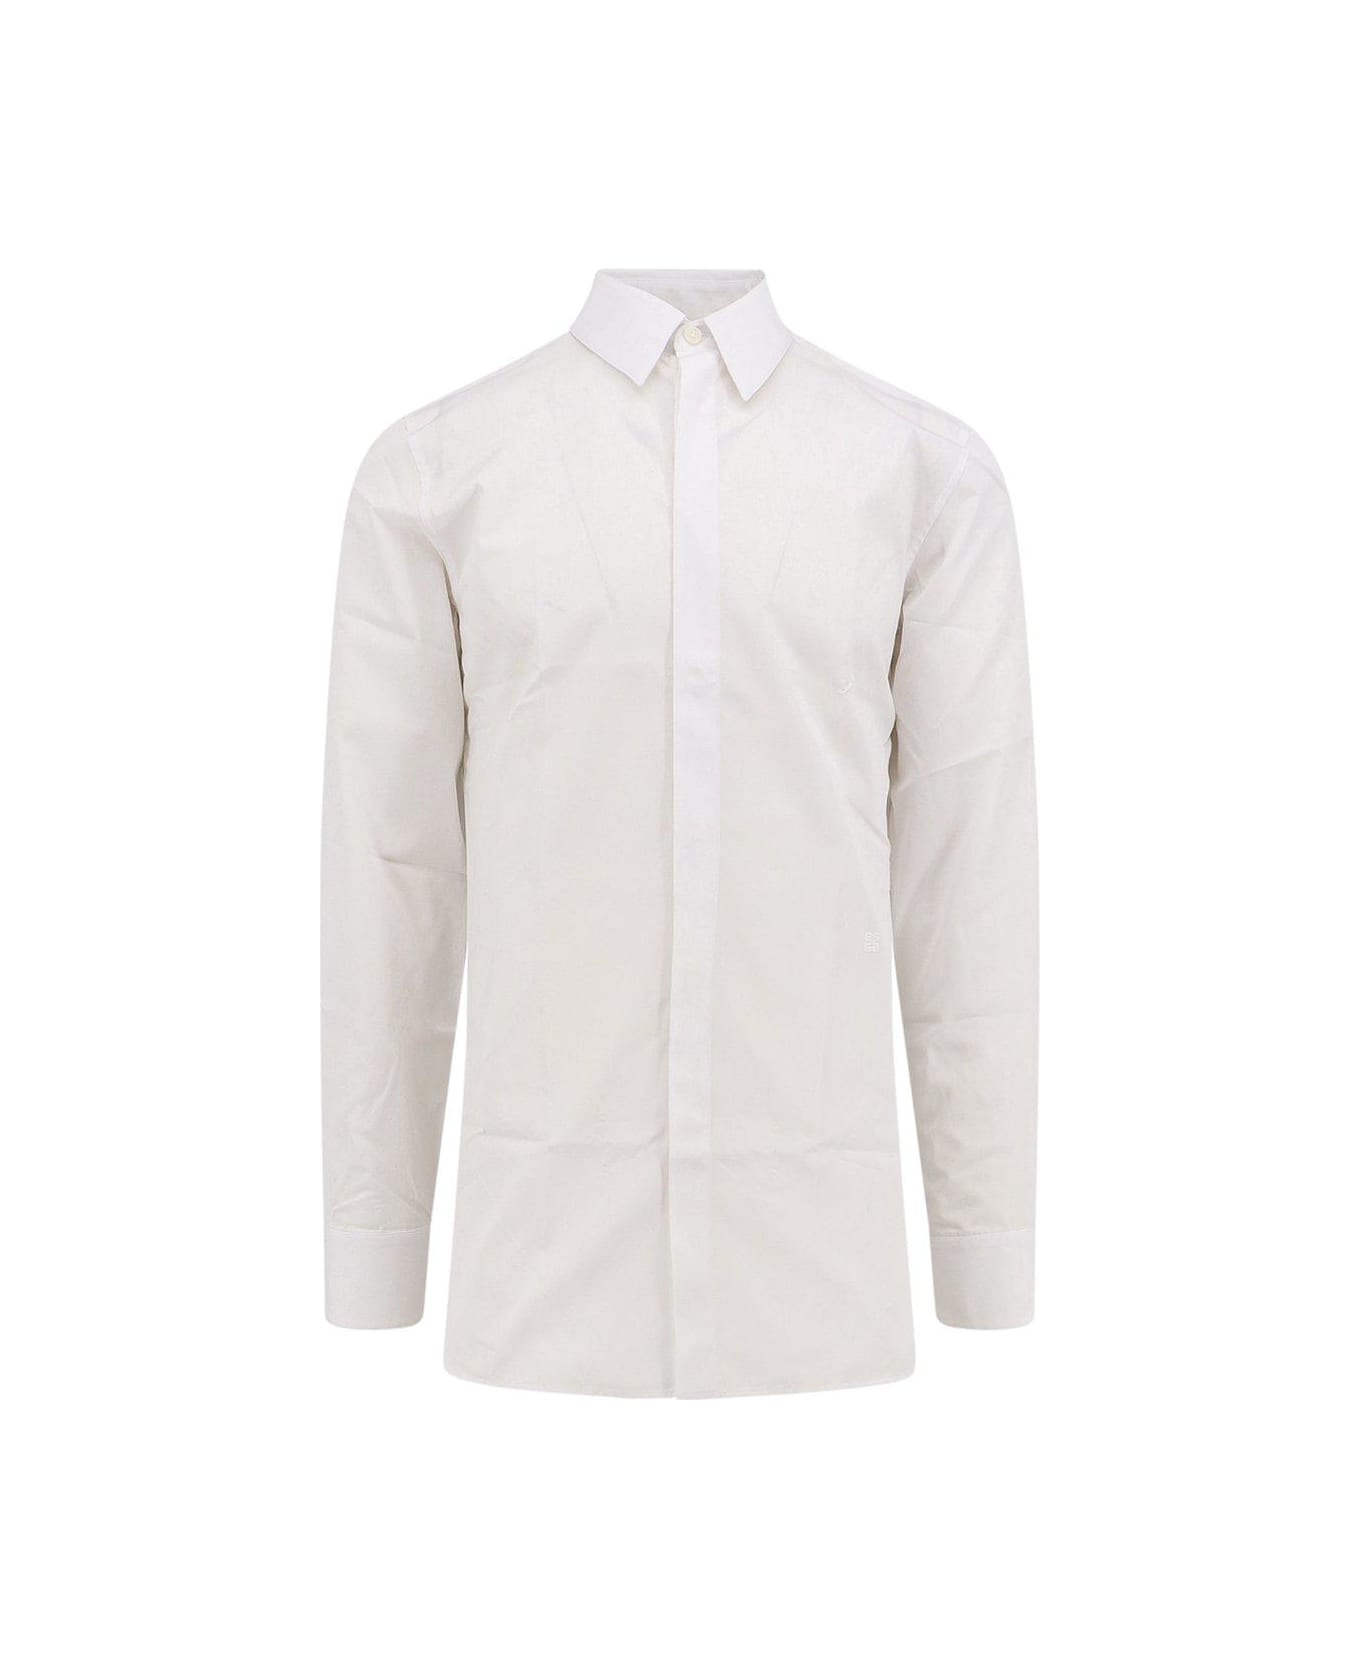 Givenchy Embroidered Long-sleeved Shirt - White シャツ